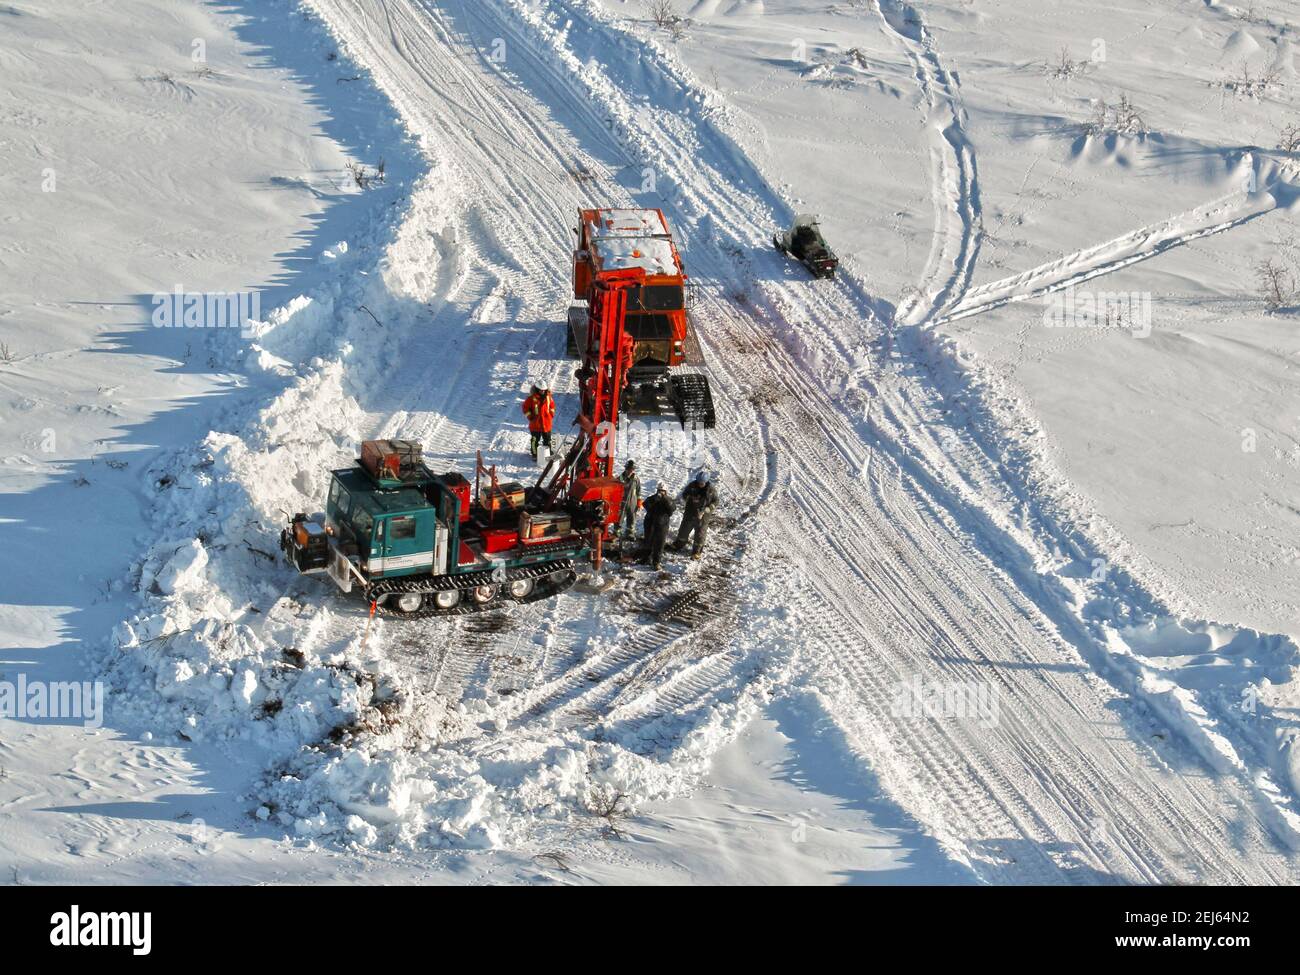 Geotech drilling rig testing gravel sources for the Inuvik-Tuktoyaktuk Highway during winter construction, Northwest Territories, Canada's Arctic. Stock Photo